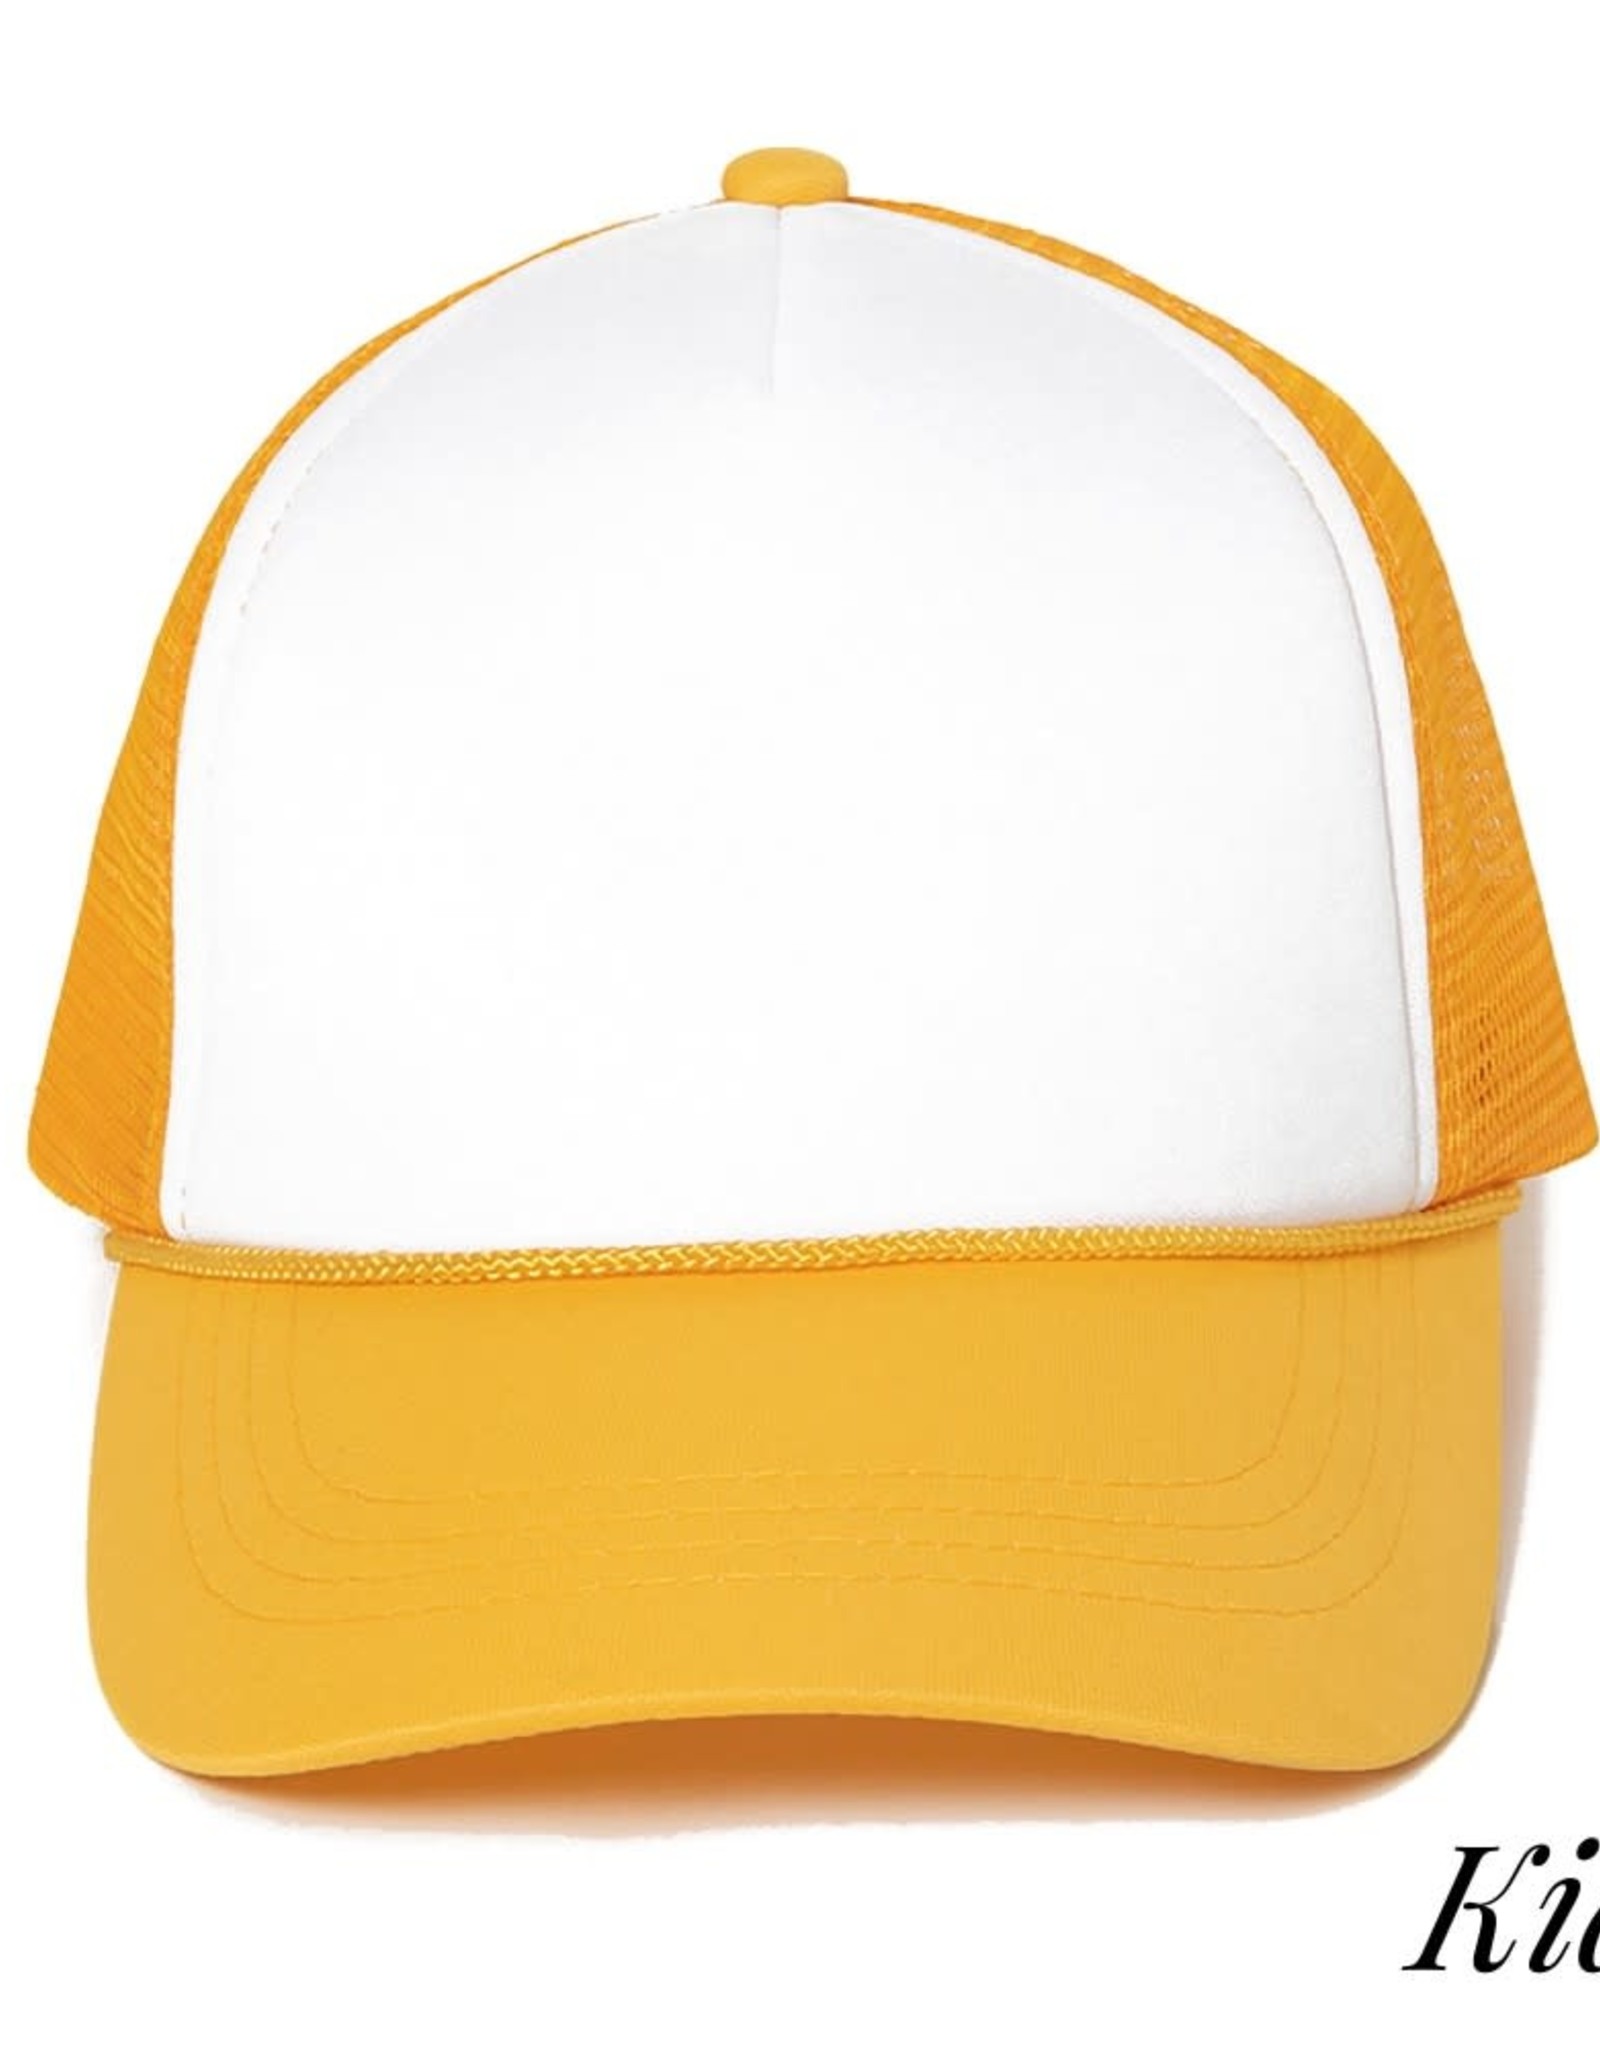 judson 729351 - Kids Solid Color Mesh Trucker Hat - Yellow